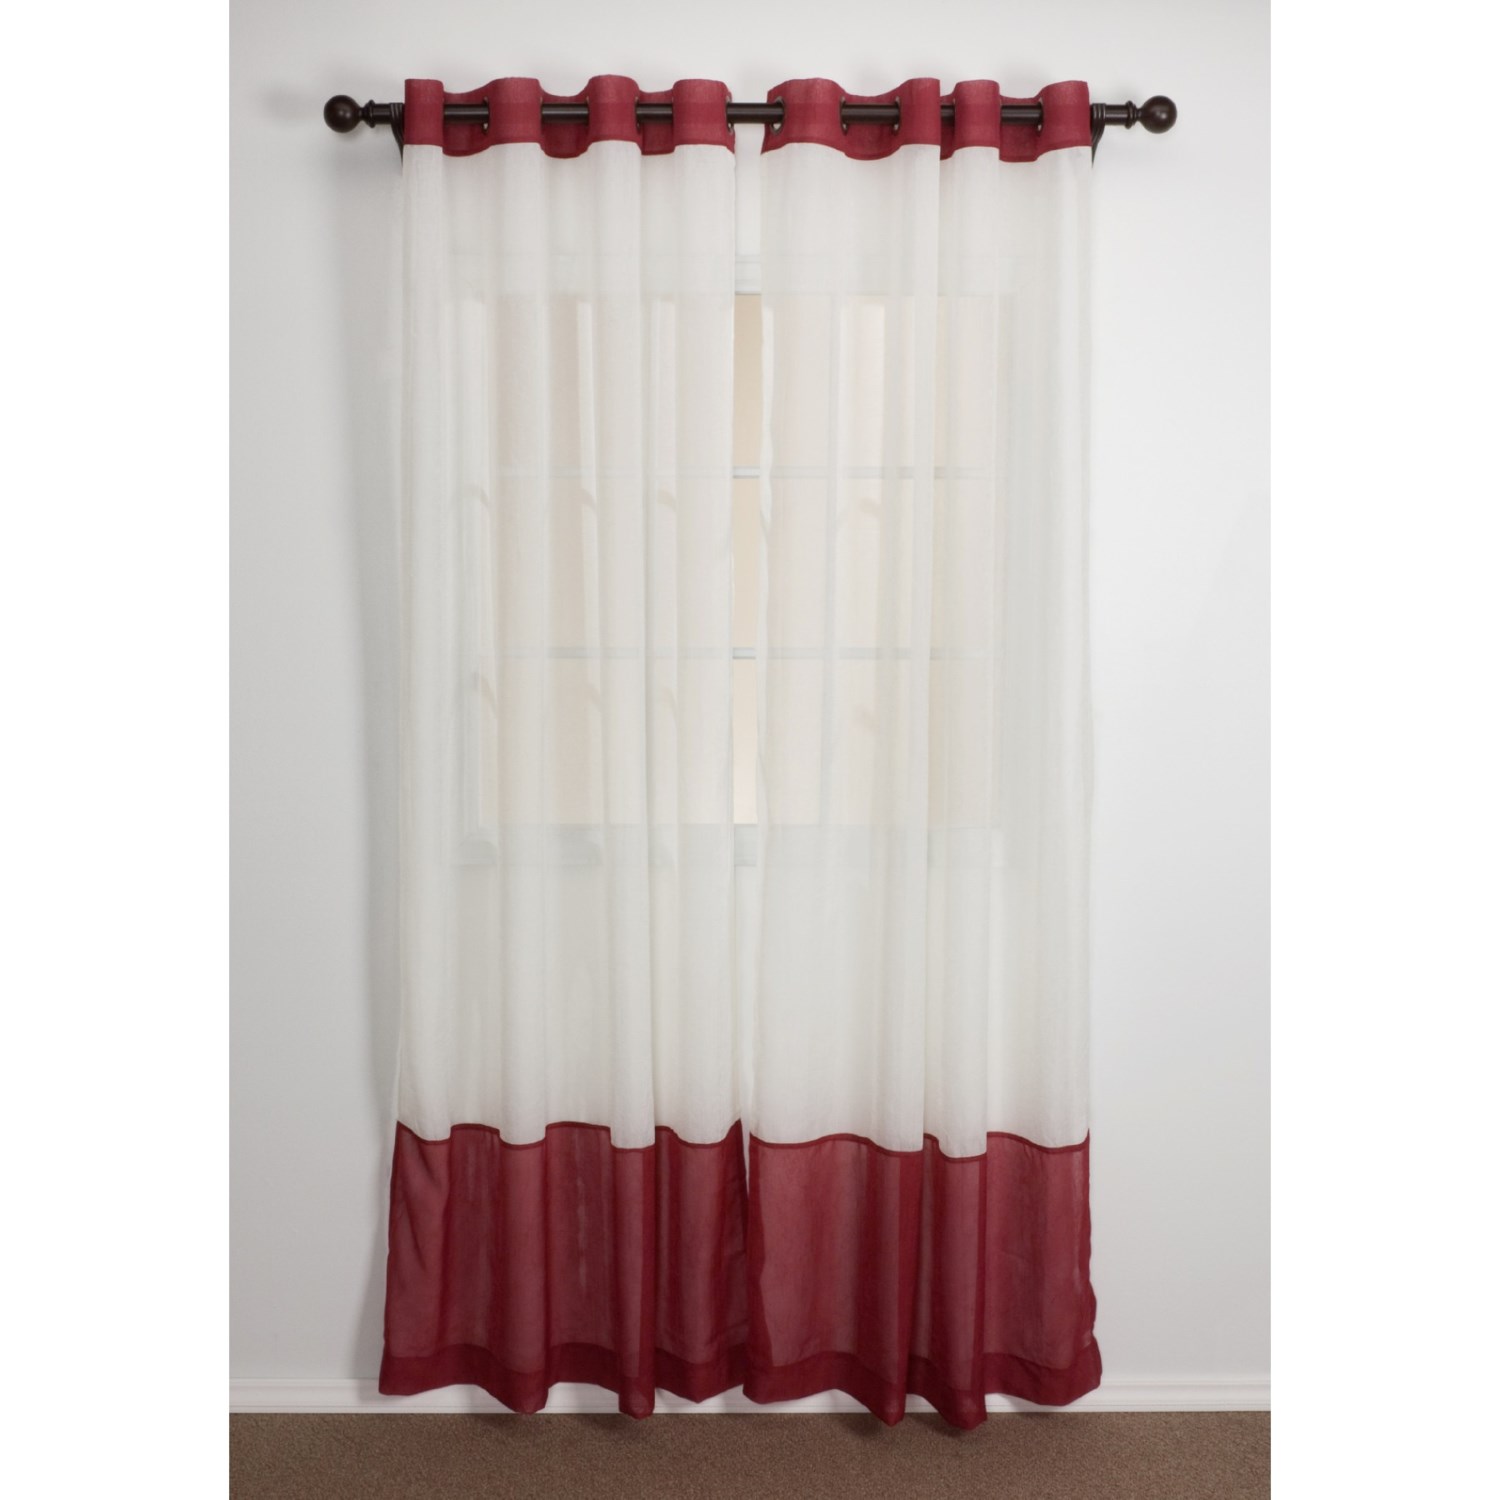 banded curtains